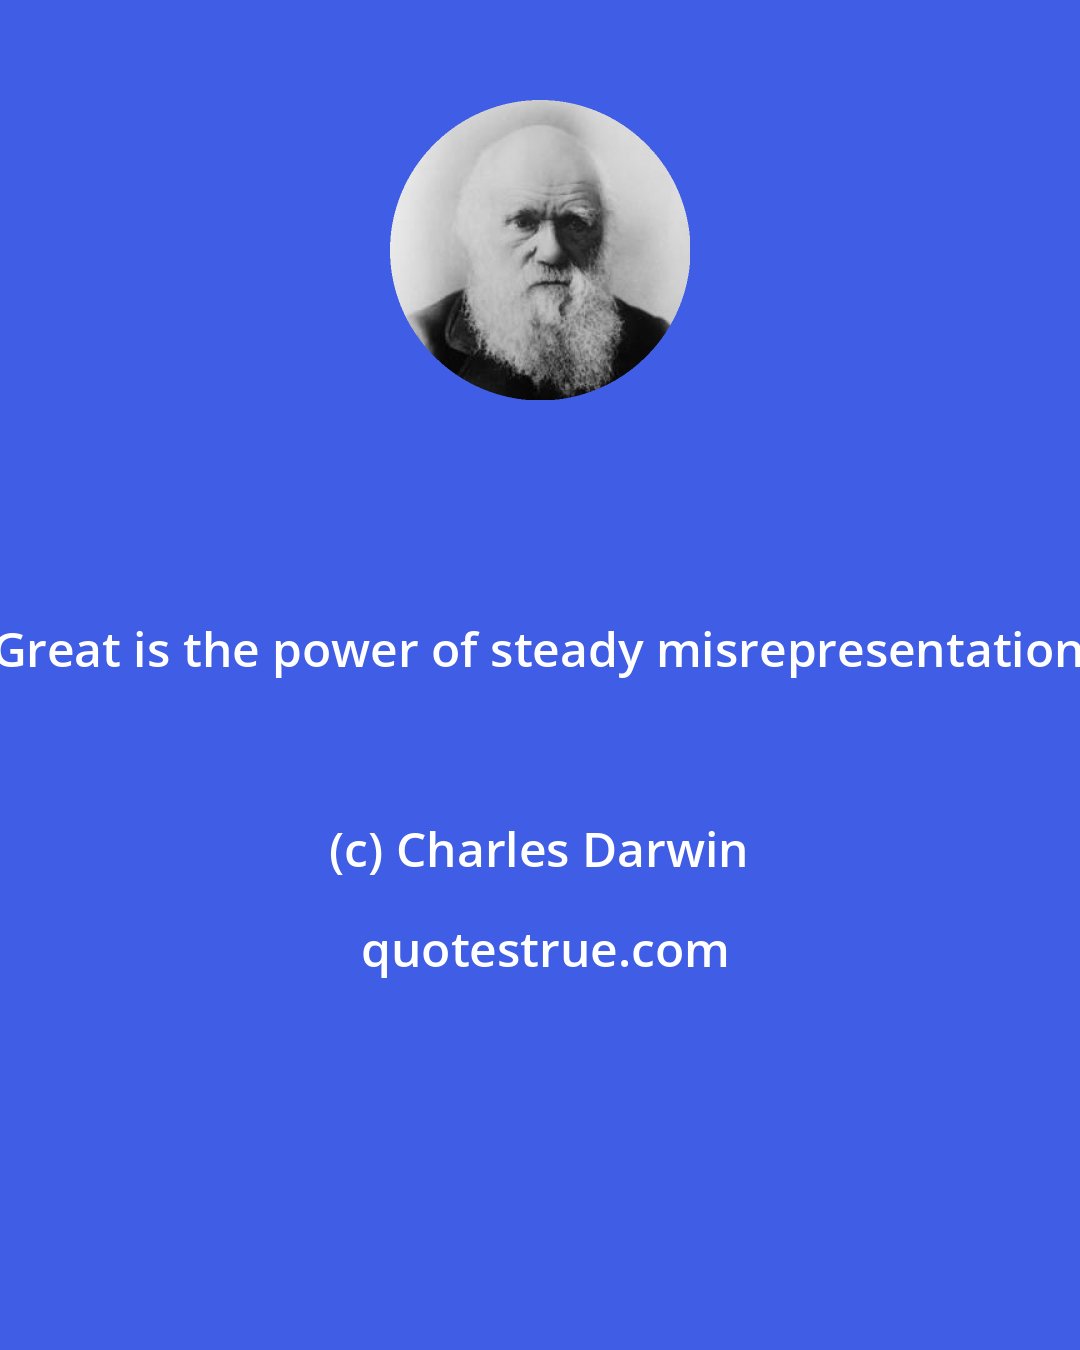 Charles Darwin: Great is the power of steady misrepresentation